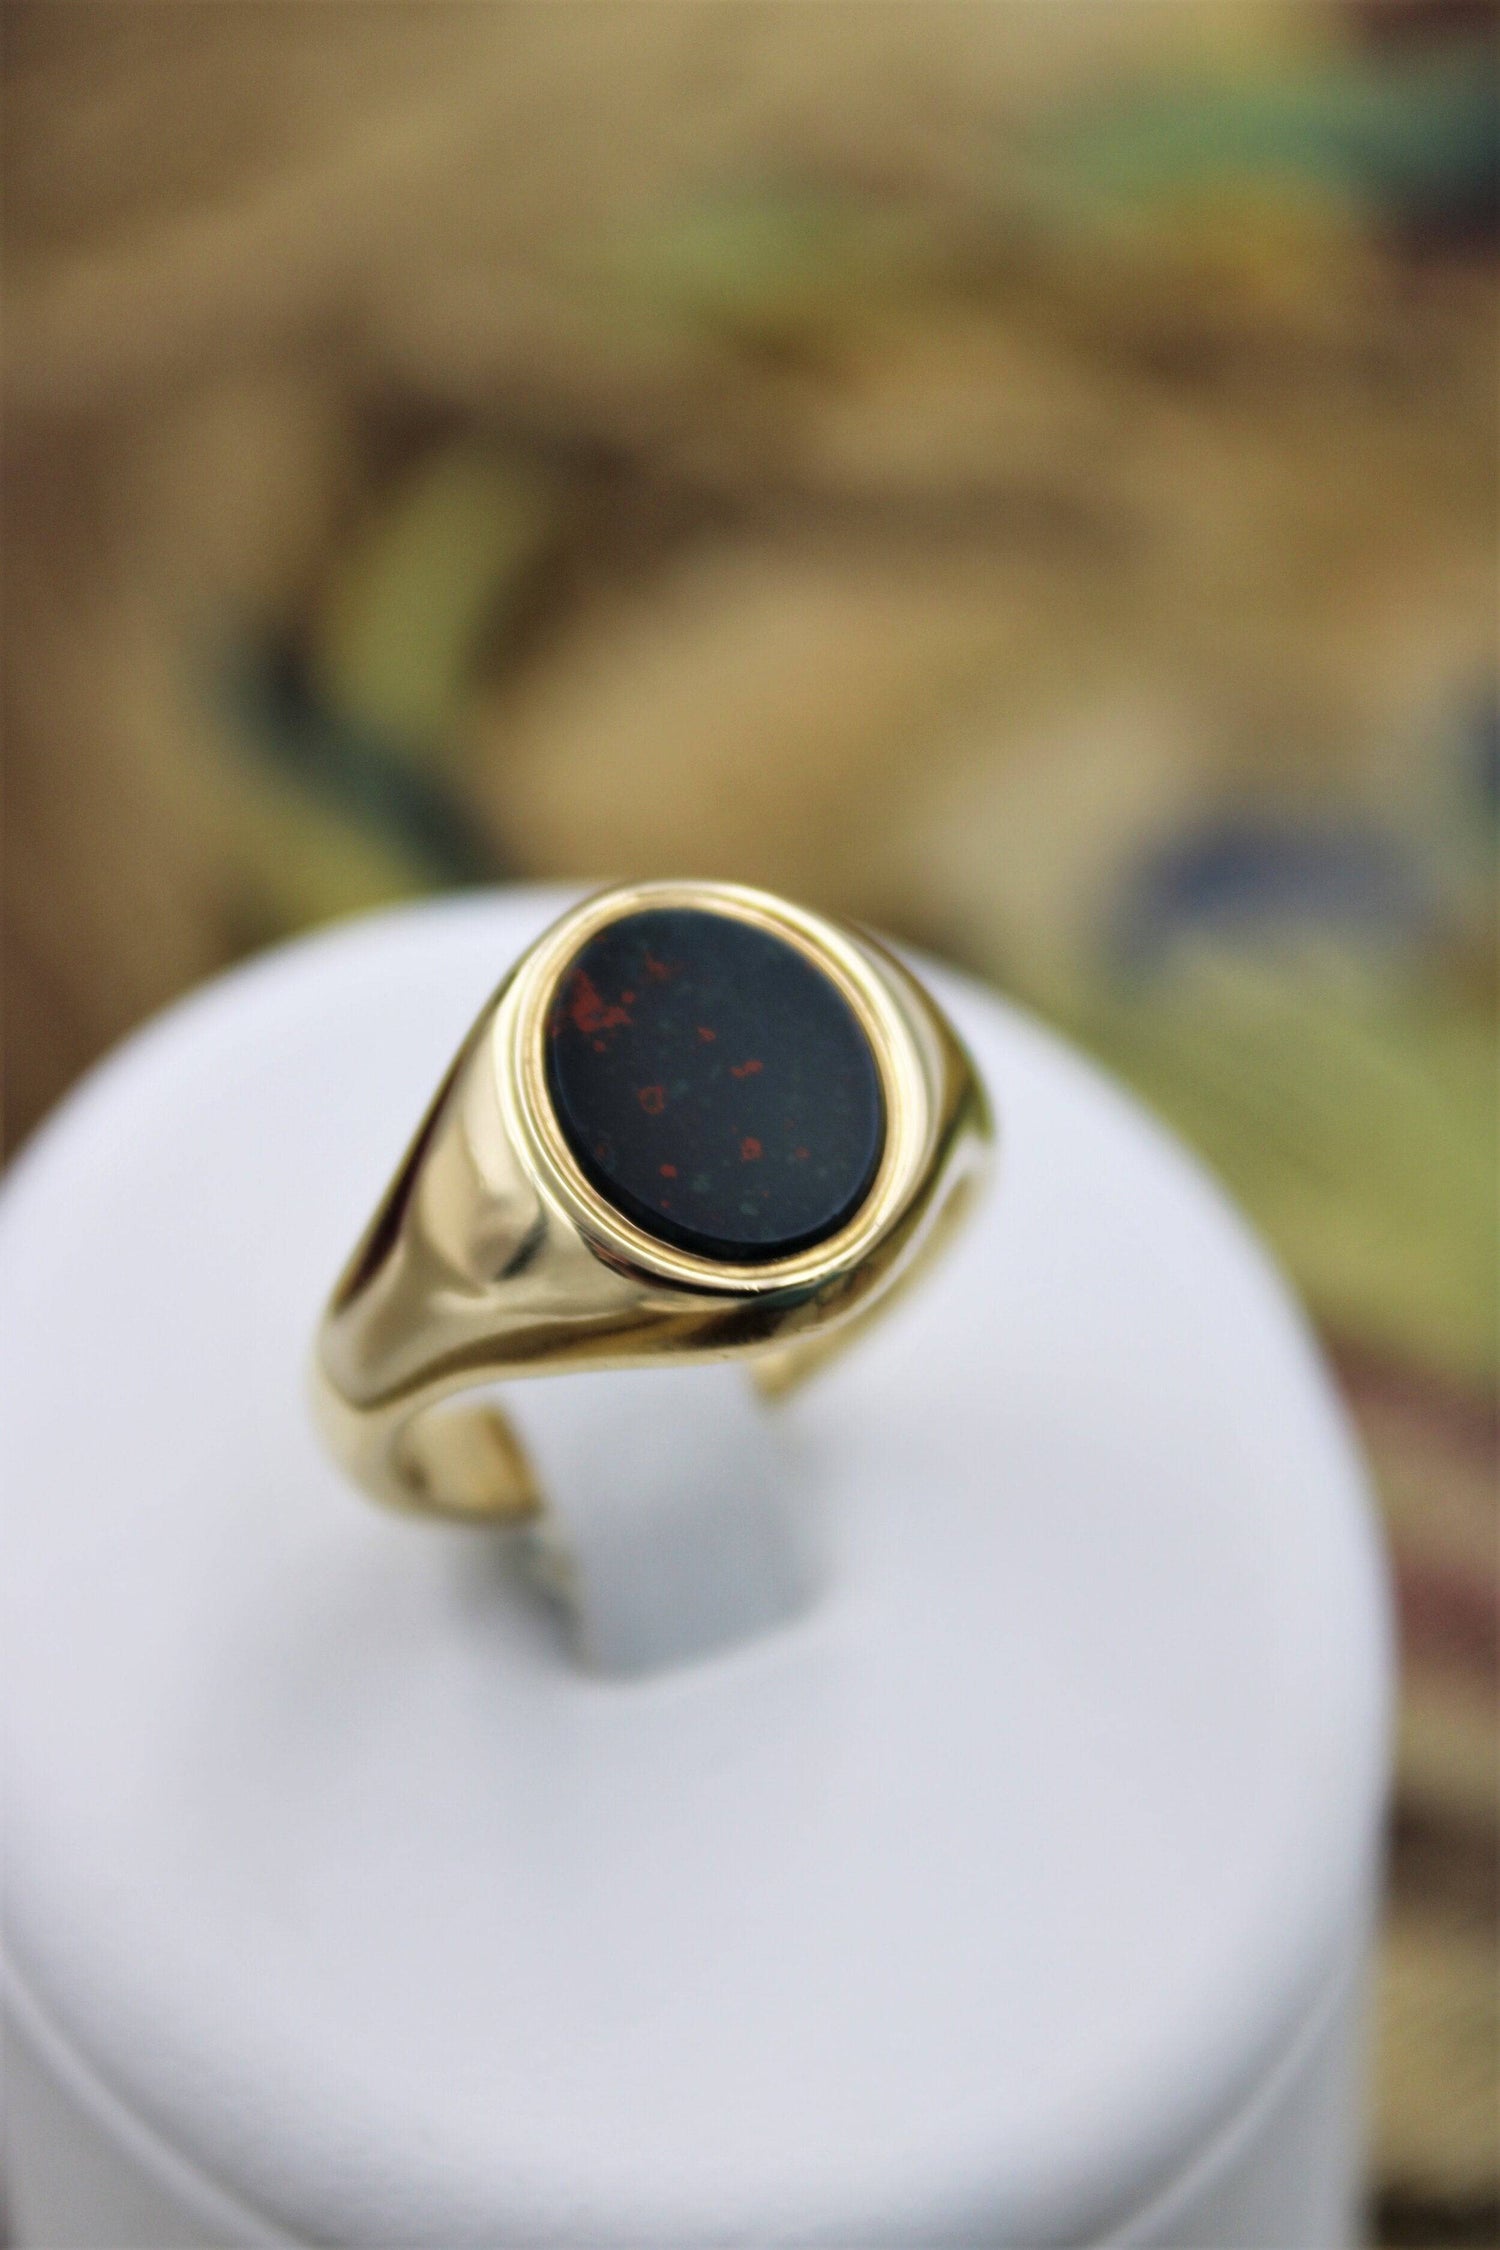 A very fine Bloodstone Signet Ring mounted in 9ct Yellow Gold (Hallmarked), English, Circa 1978 - Robin Haydock Antiques